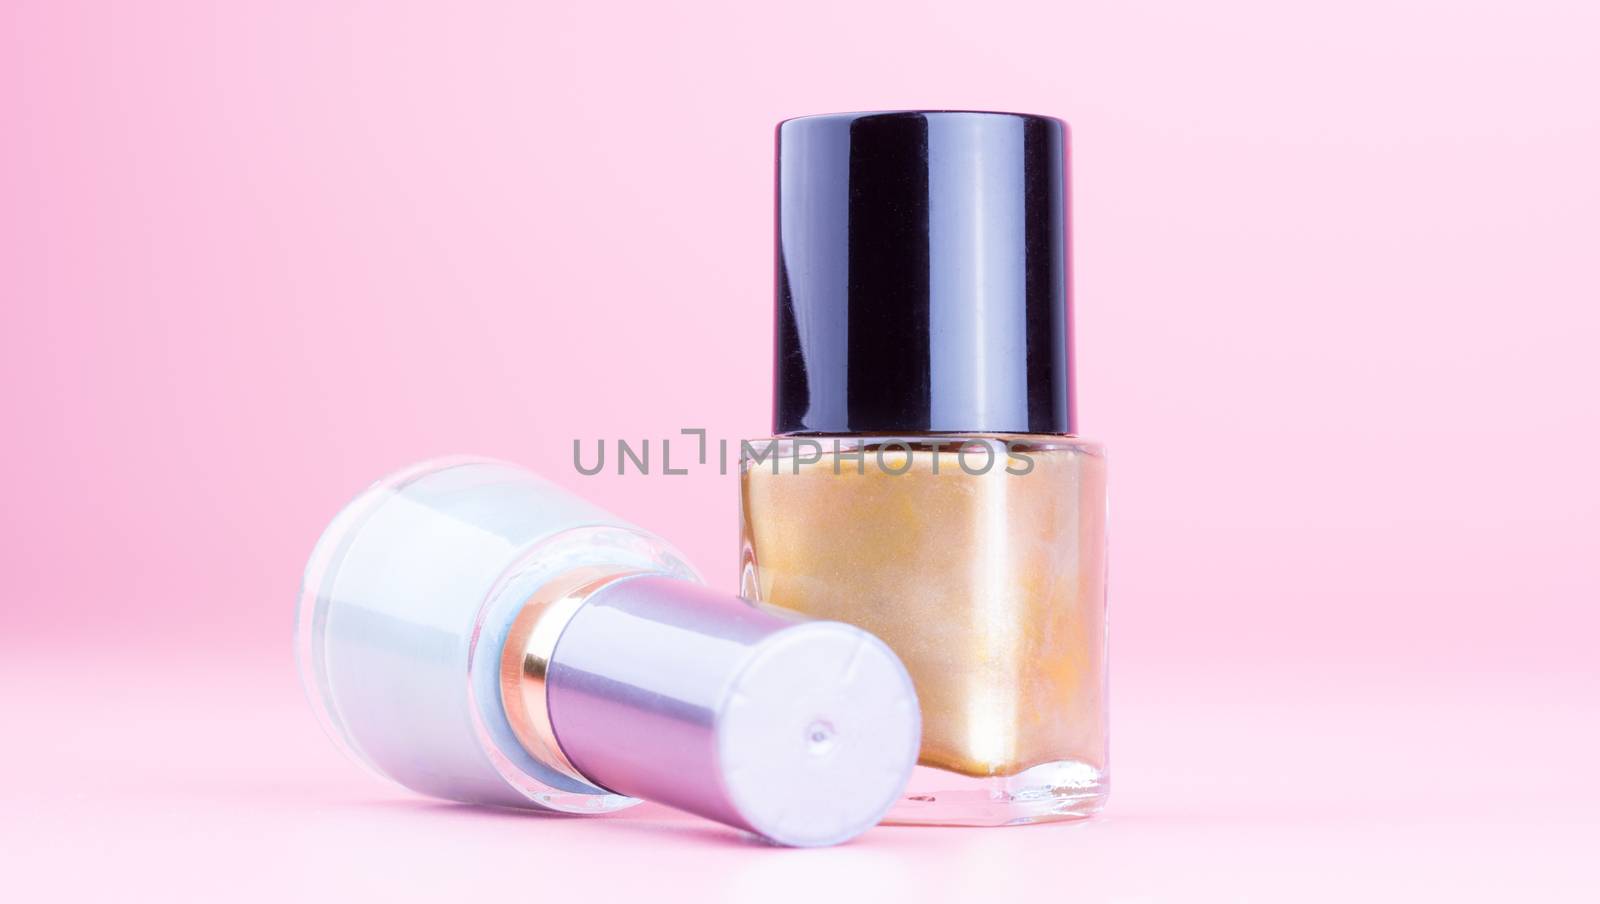 Two bottle of nail polish on pink background